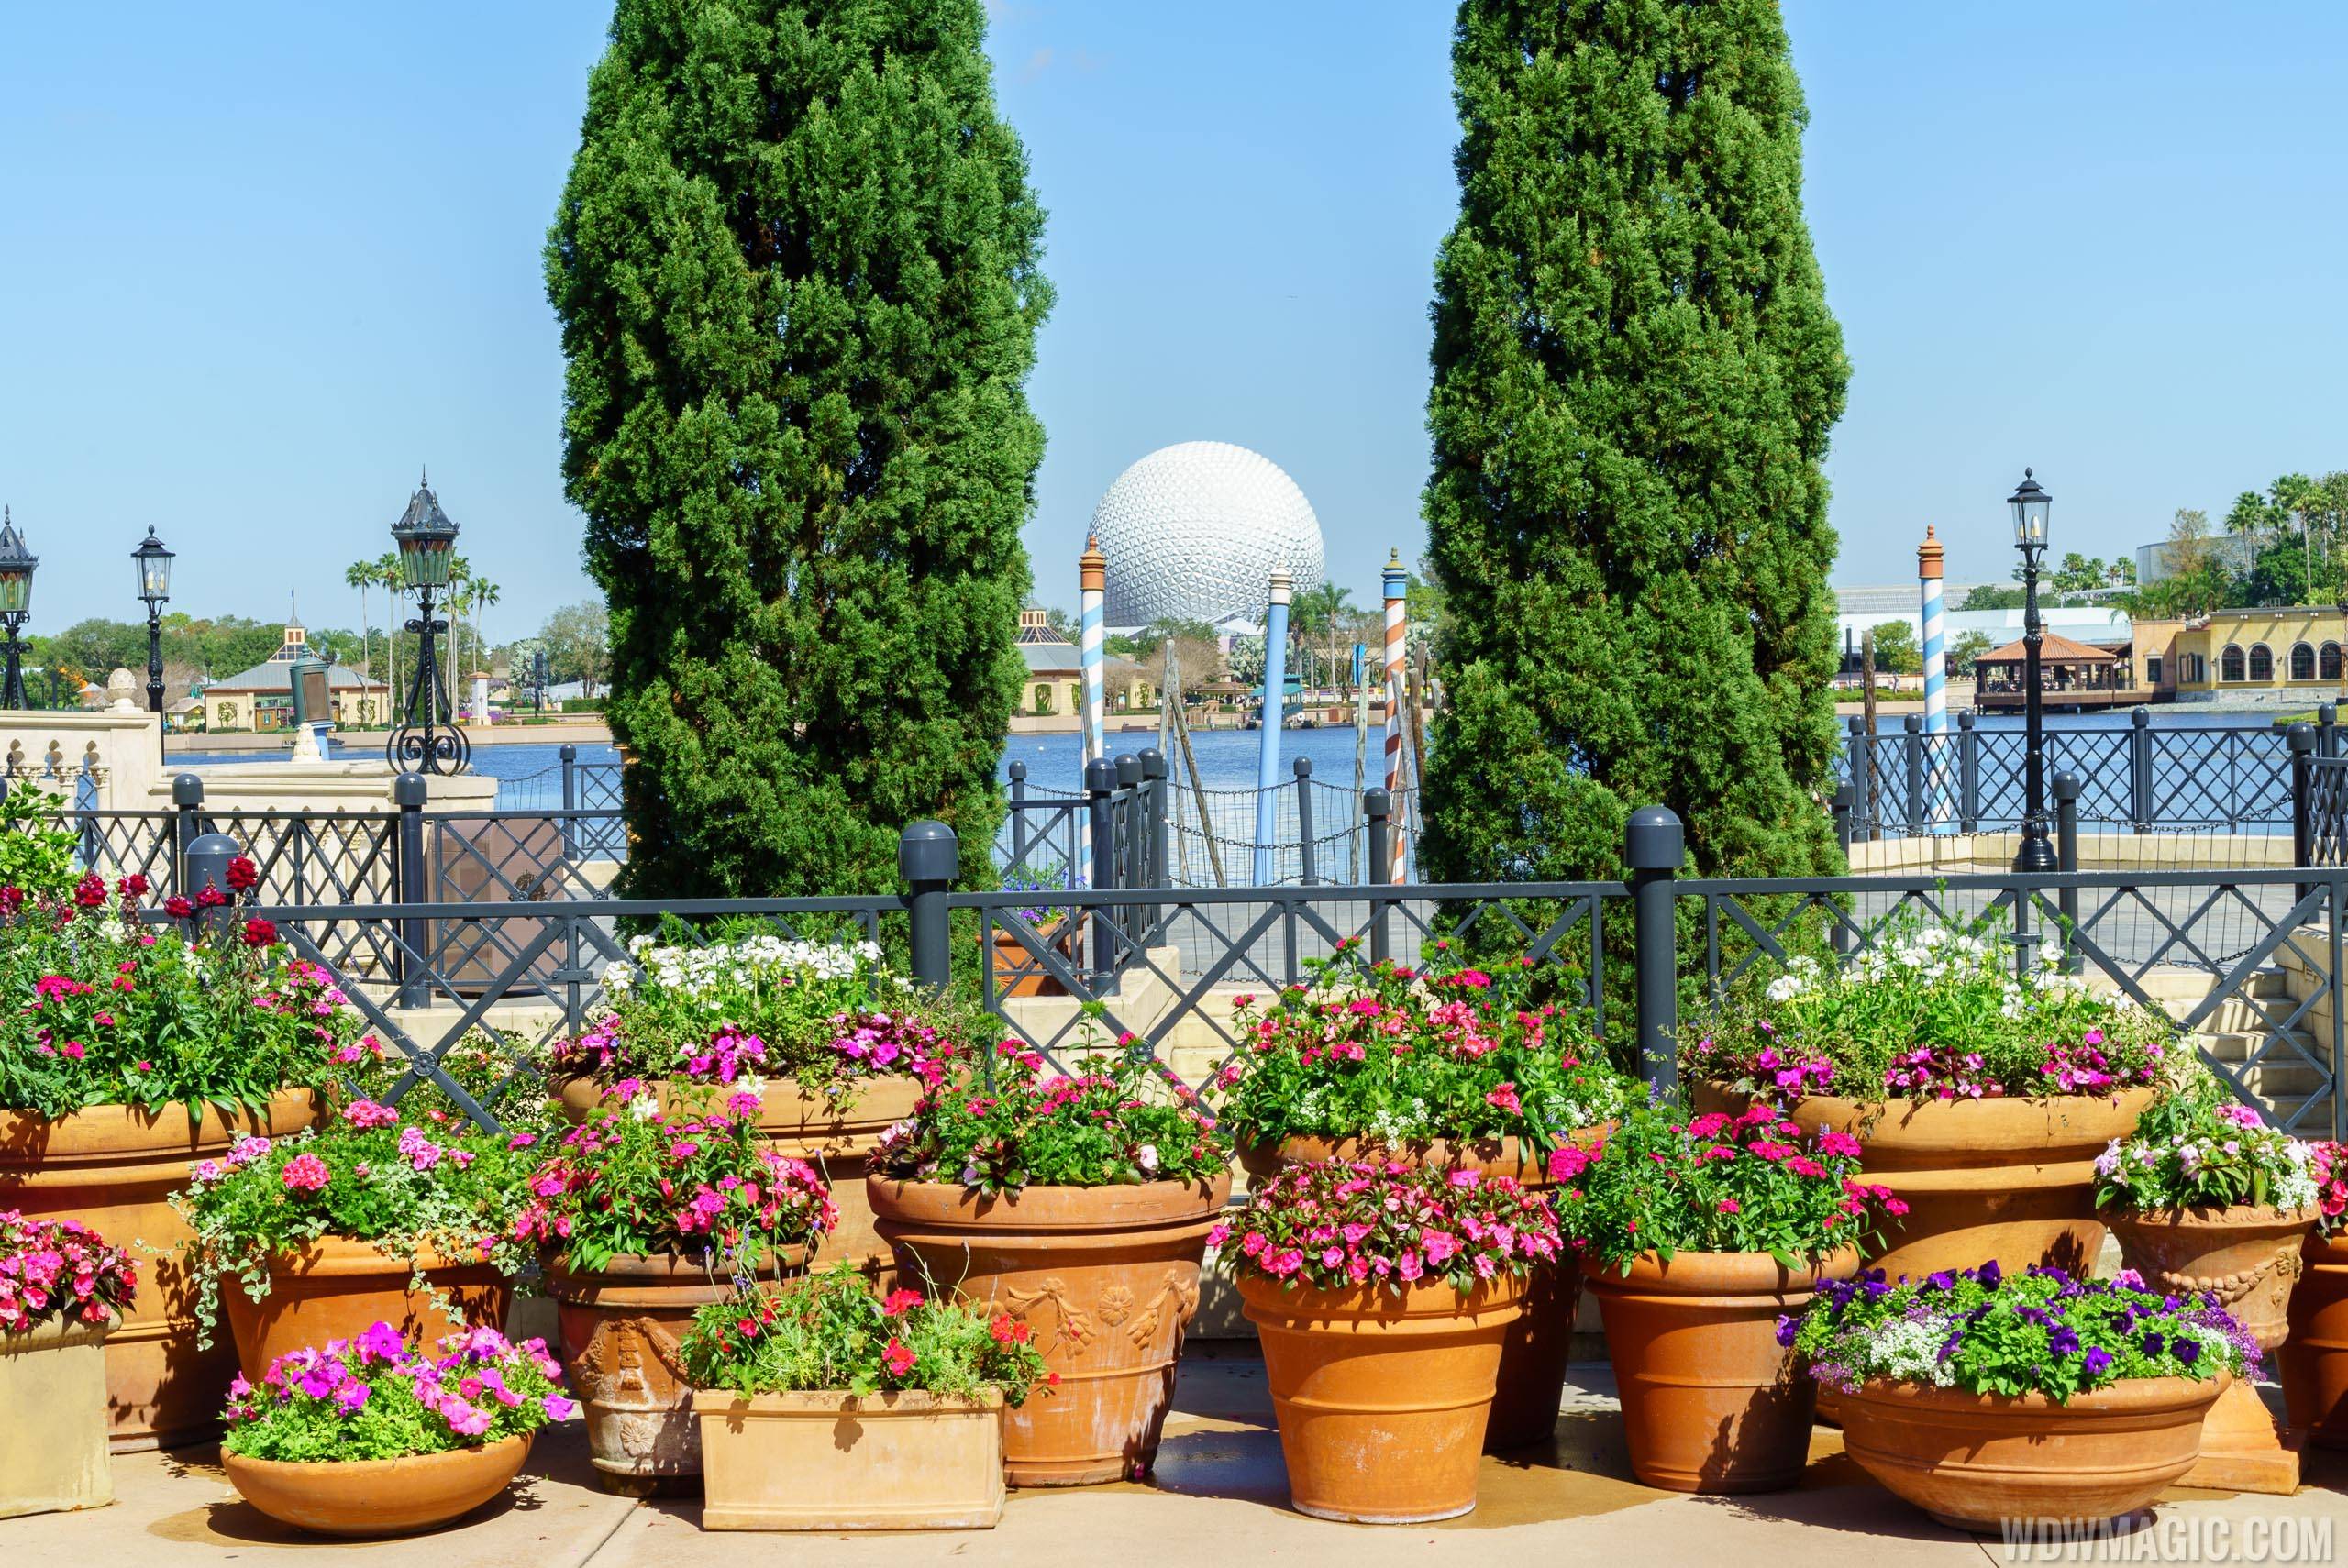 2016 Epcot International Flower and Garden Festival - Italy floral display